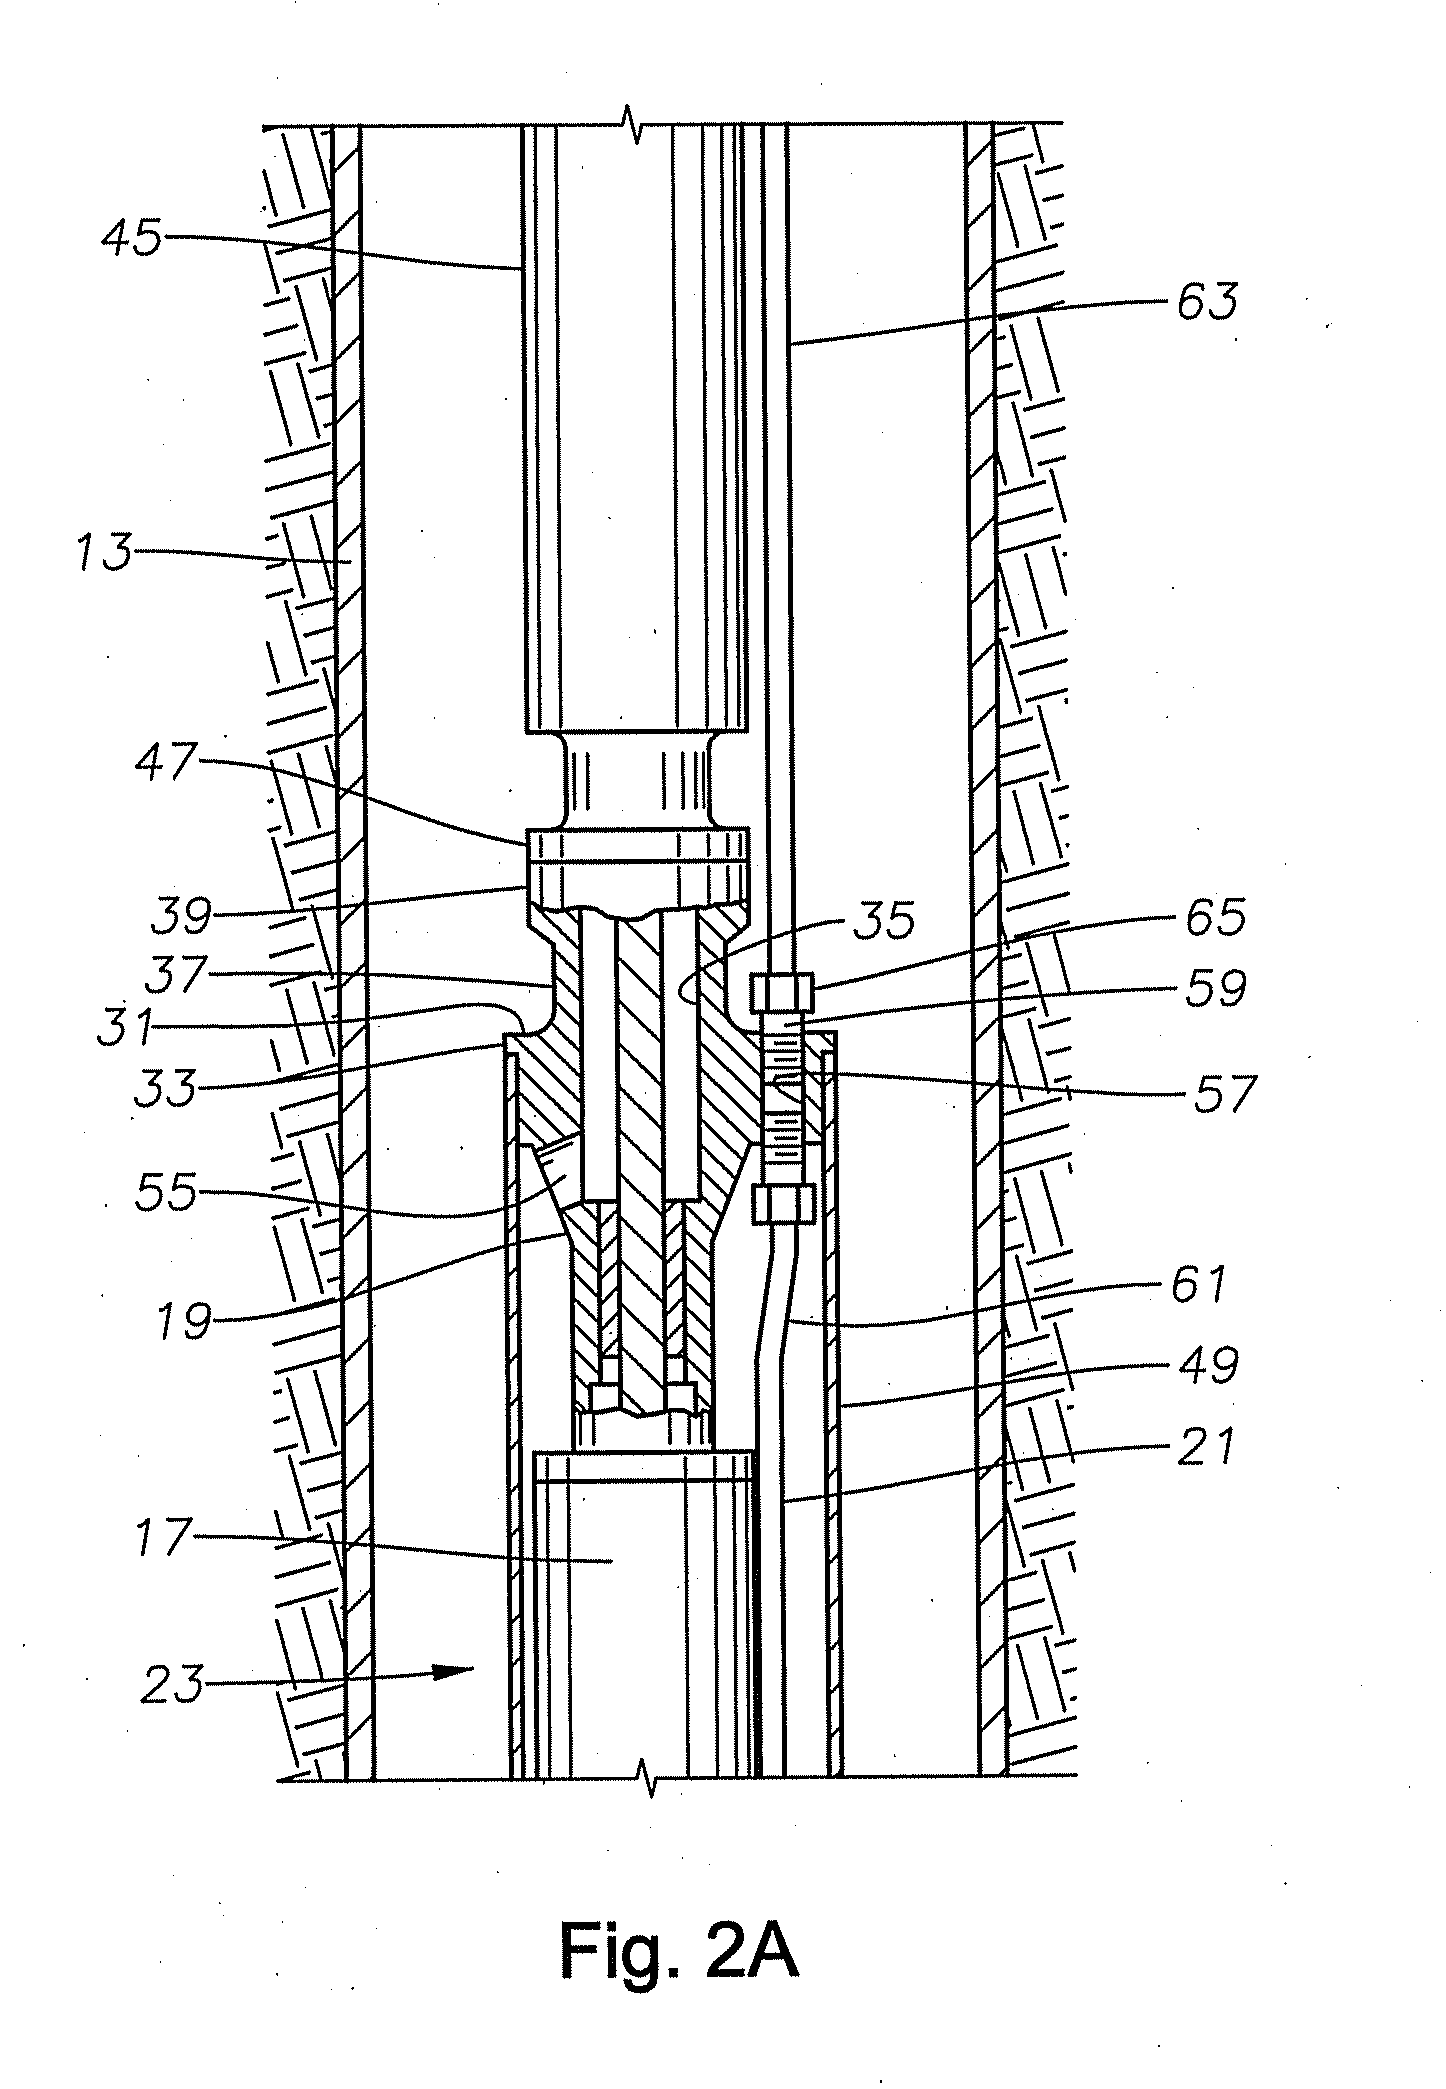 Intake for shrouded electric submersible pump assembly